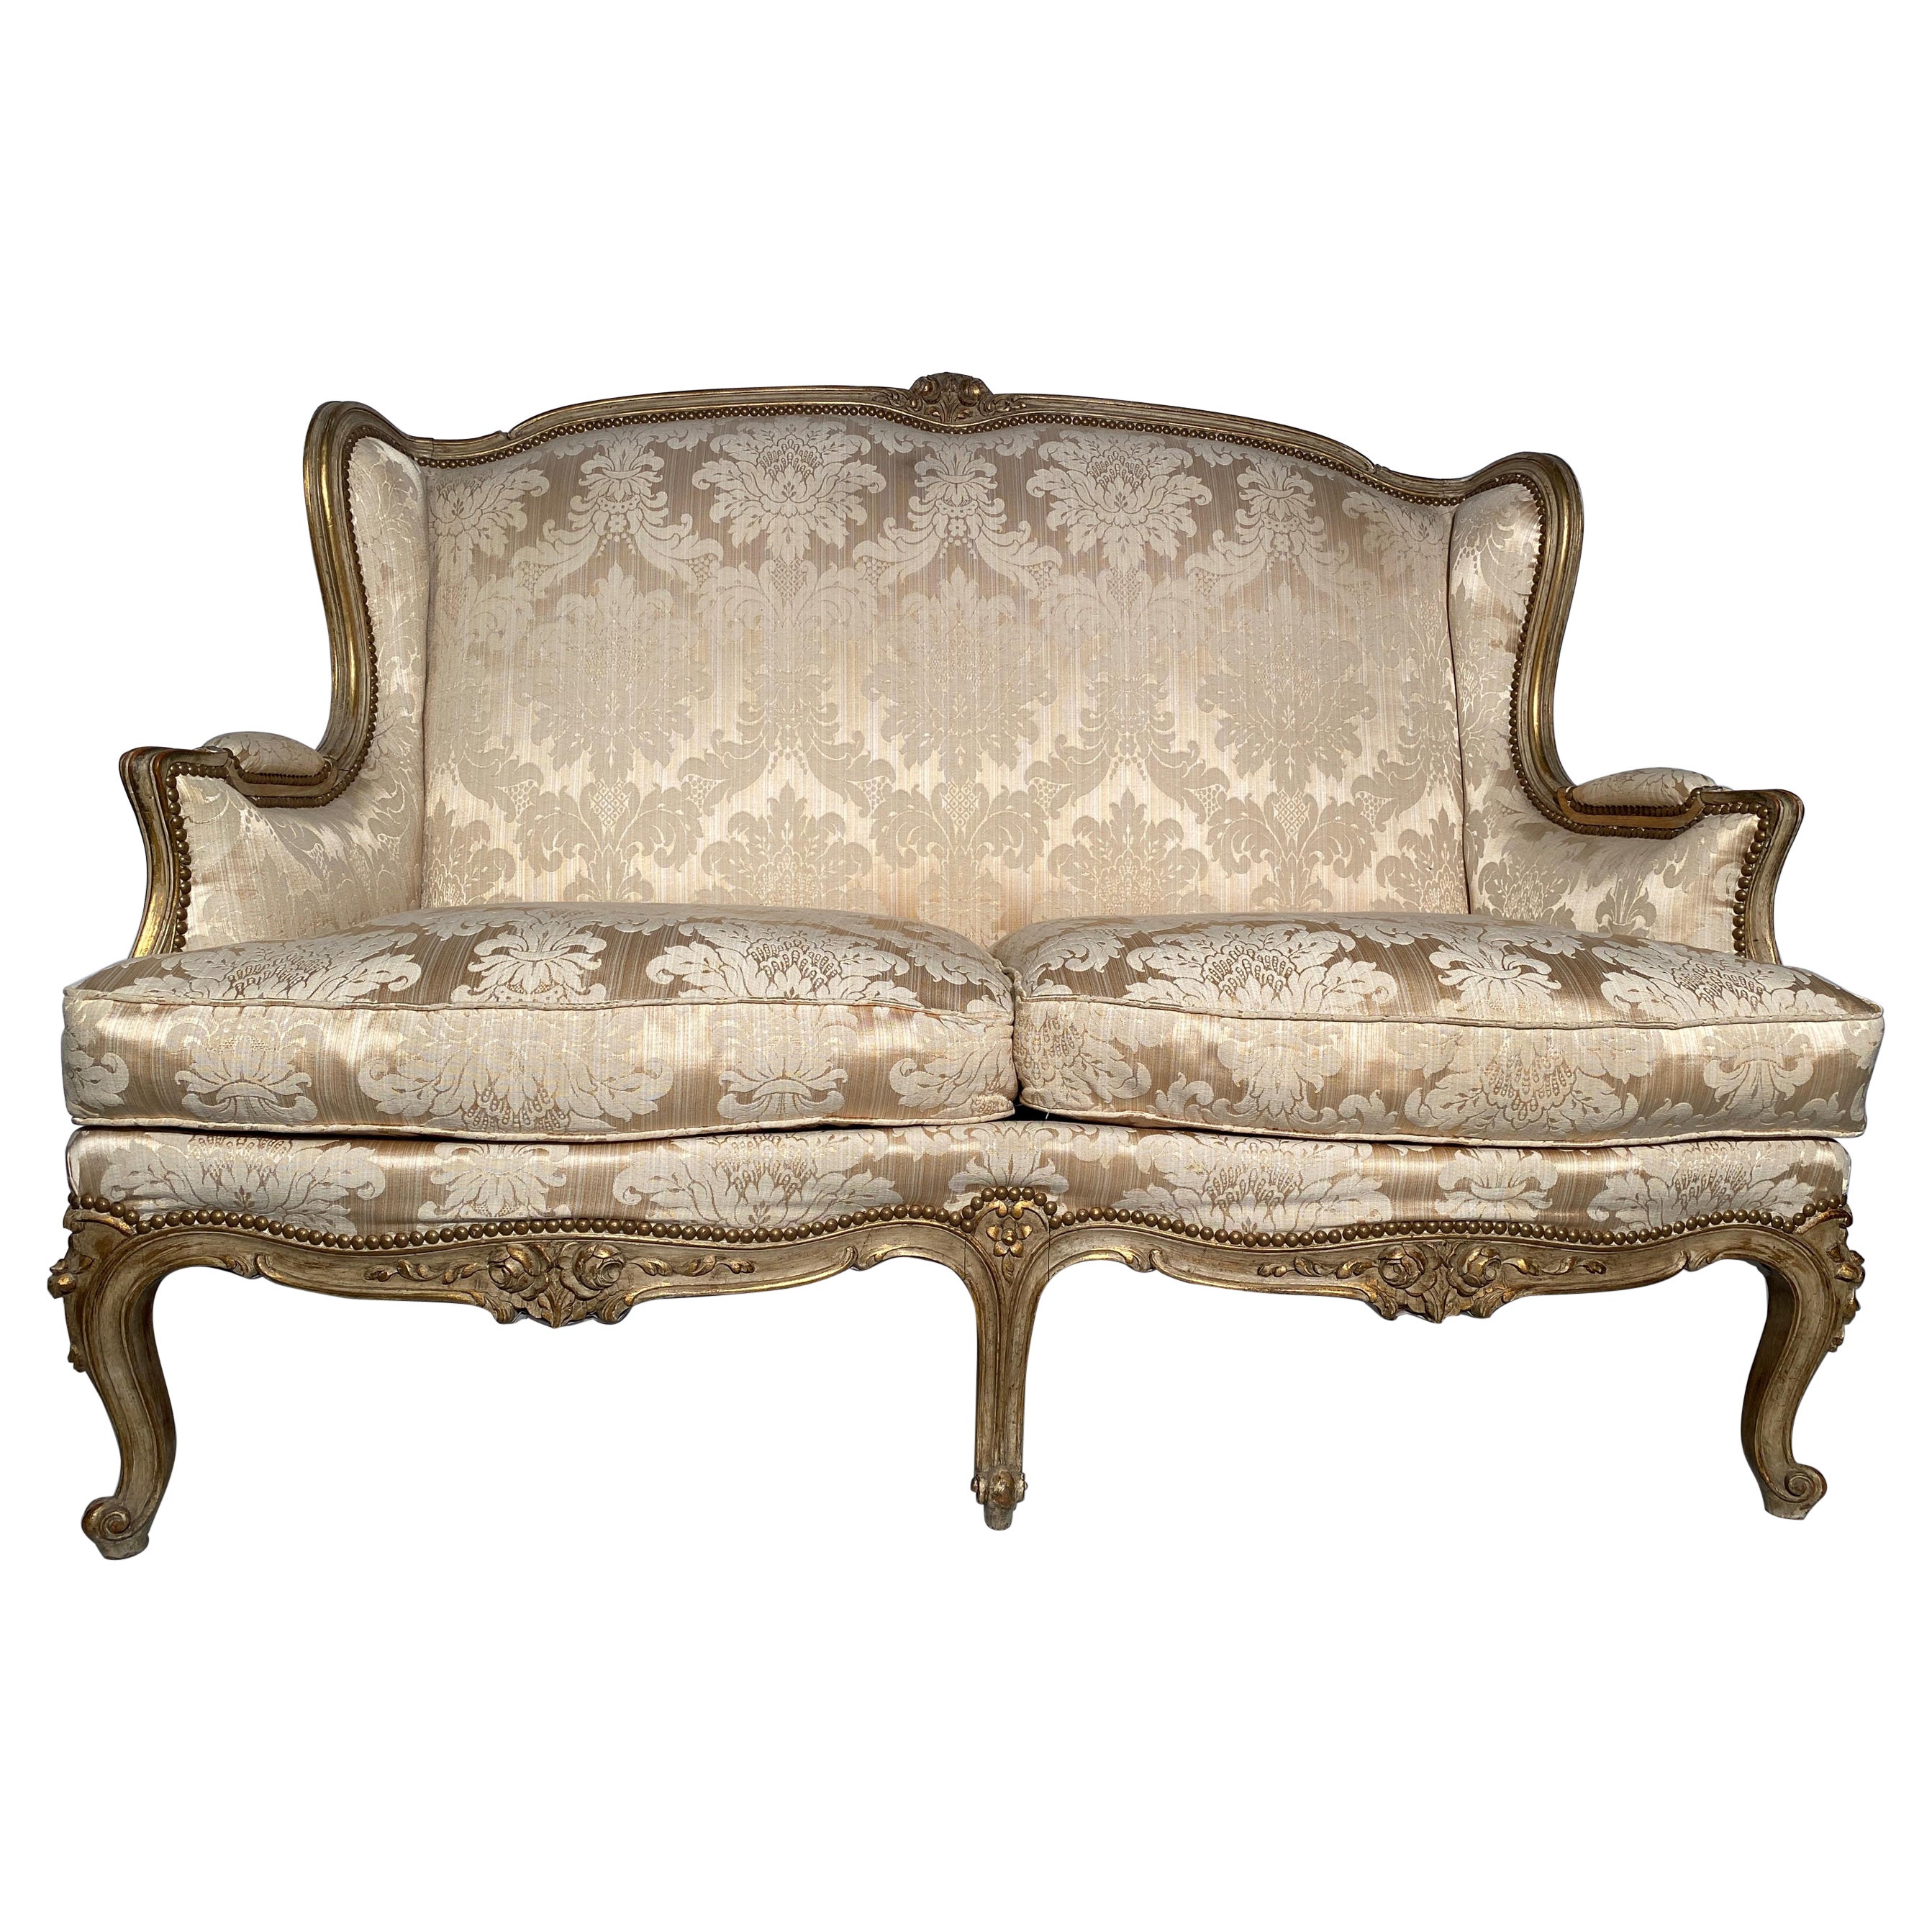 Sofa In Molded Wood And Carved With Flowers France Louis XV Style For Sale